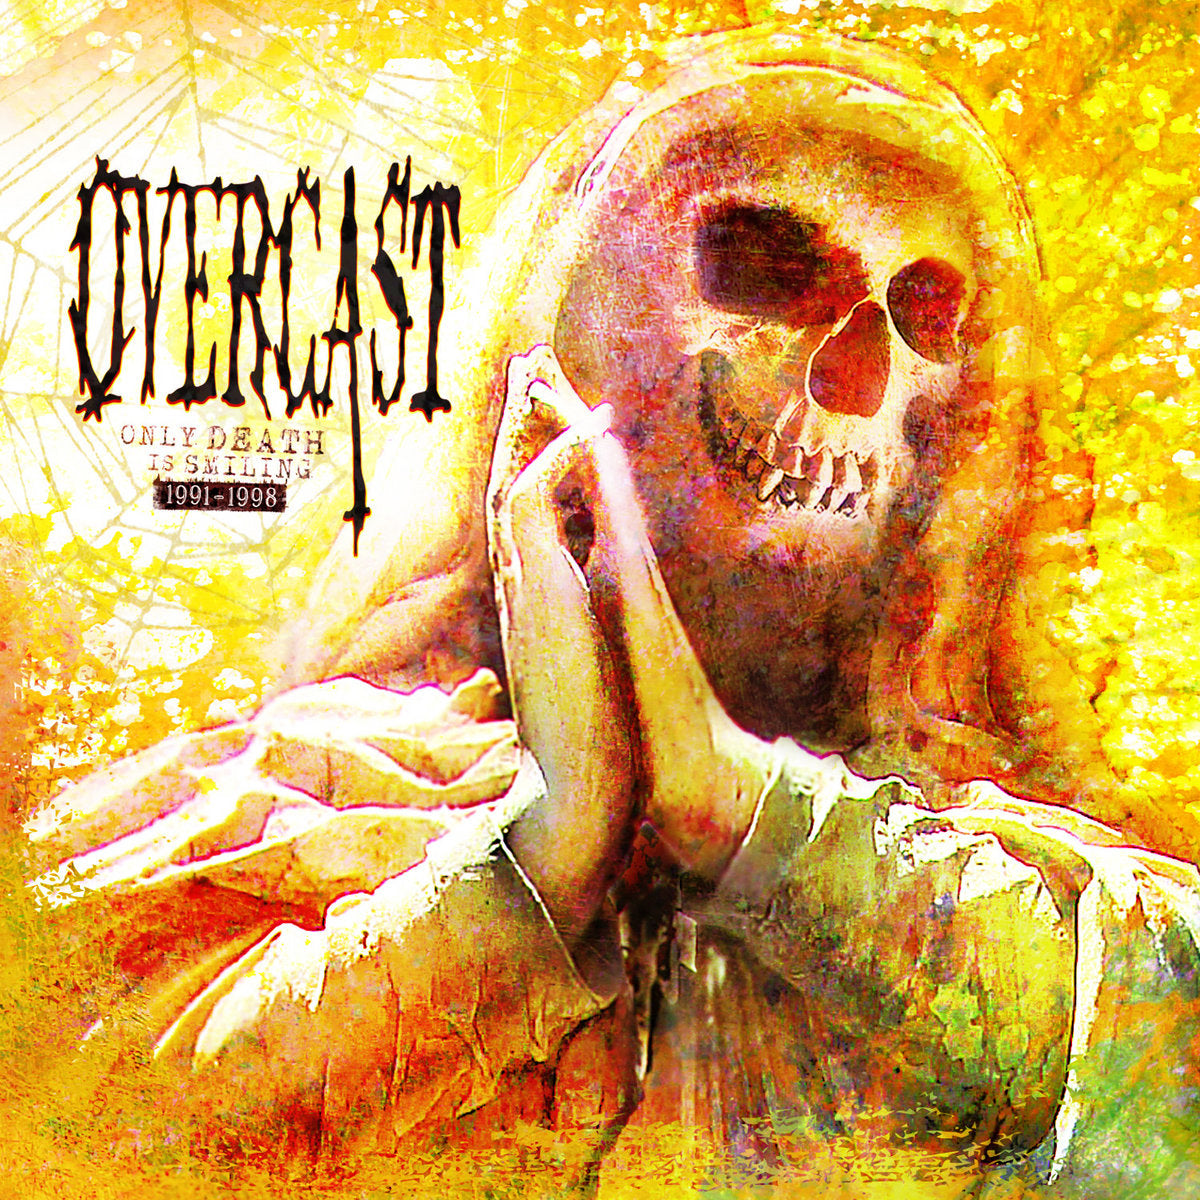 Overcast "Only Death Is Smiling 1991-1998" 12" Vinyl